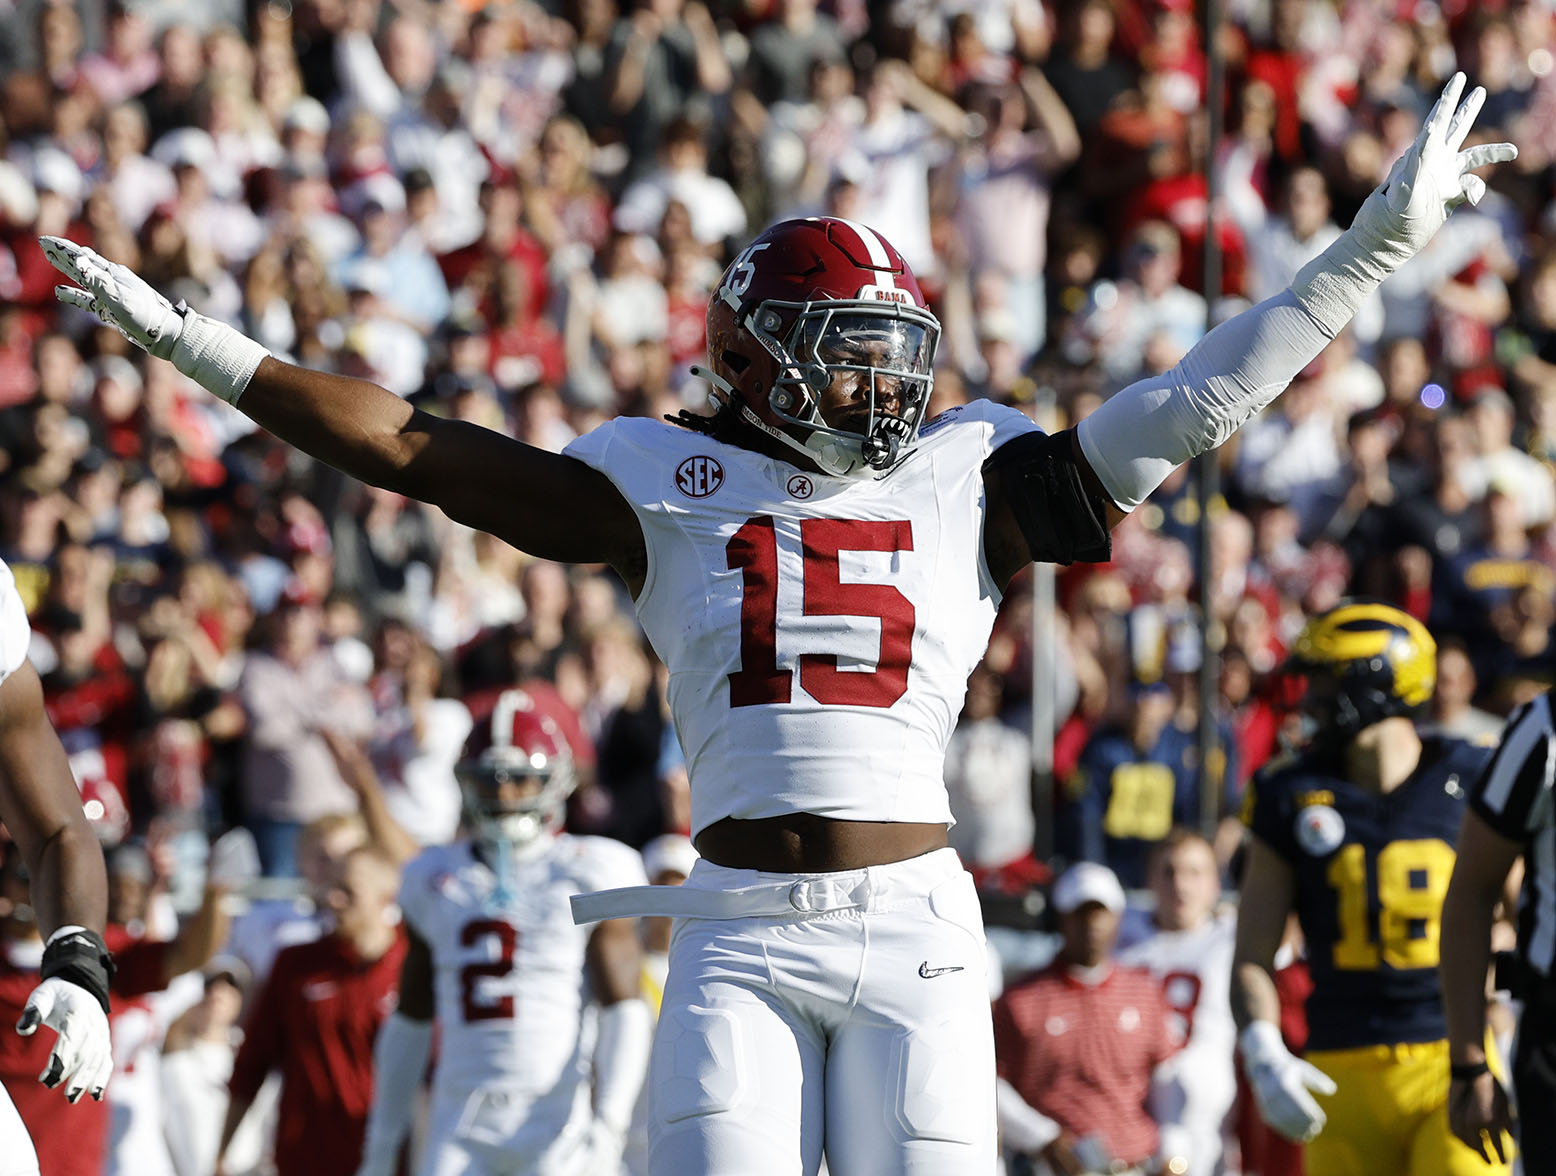 PASADENA, CALIFORNIA - JANUARY 01: Dallas Turner #15 of the Alabama Crimson Tide celebrates in the first quarter against the Michigan Wolverines during the CFP Semifinal Rose Bowl Game at Rose Bowl Stadium on January 01, 2024 in Pasadena, California. (Photo by Kevork Djansezian/Getty Images)